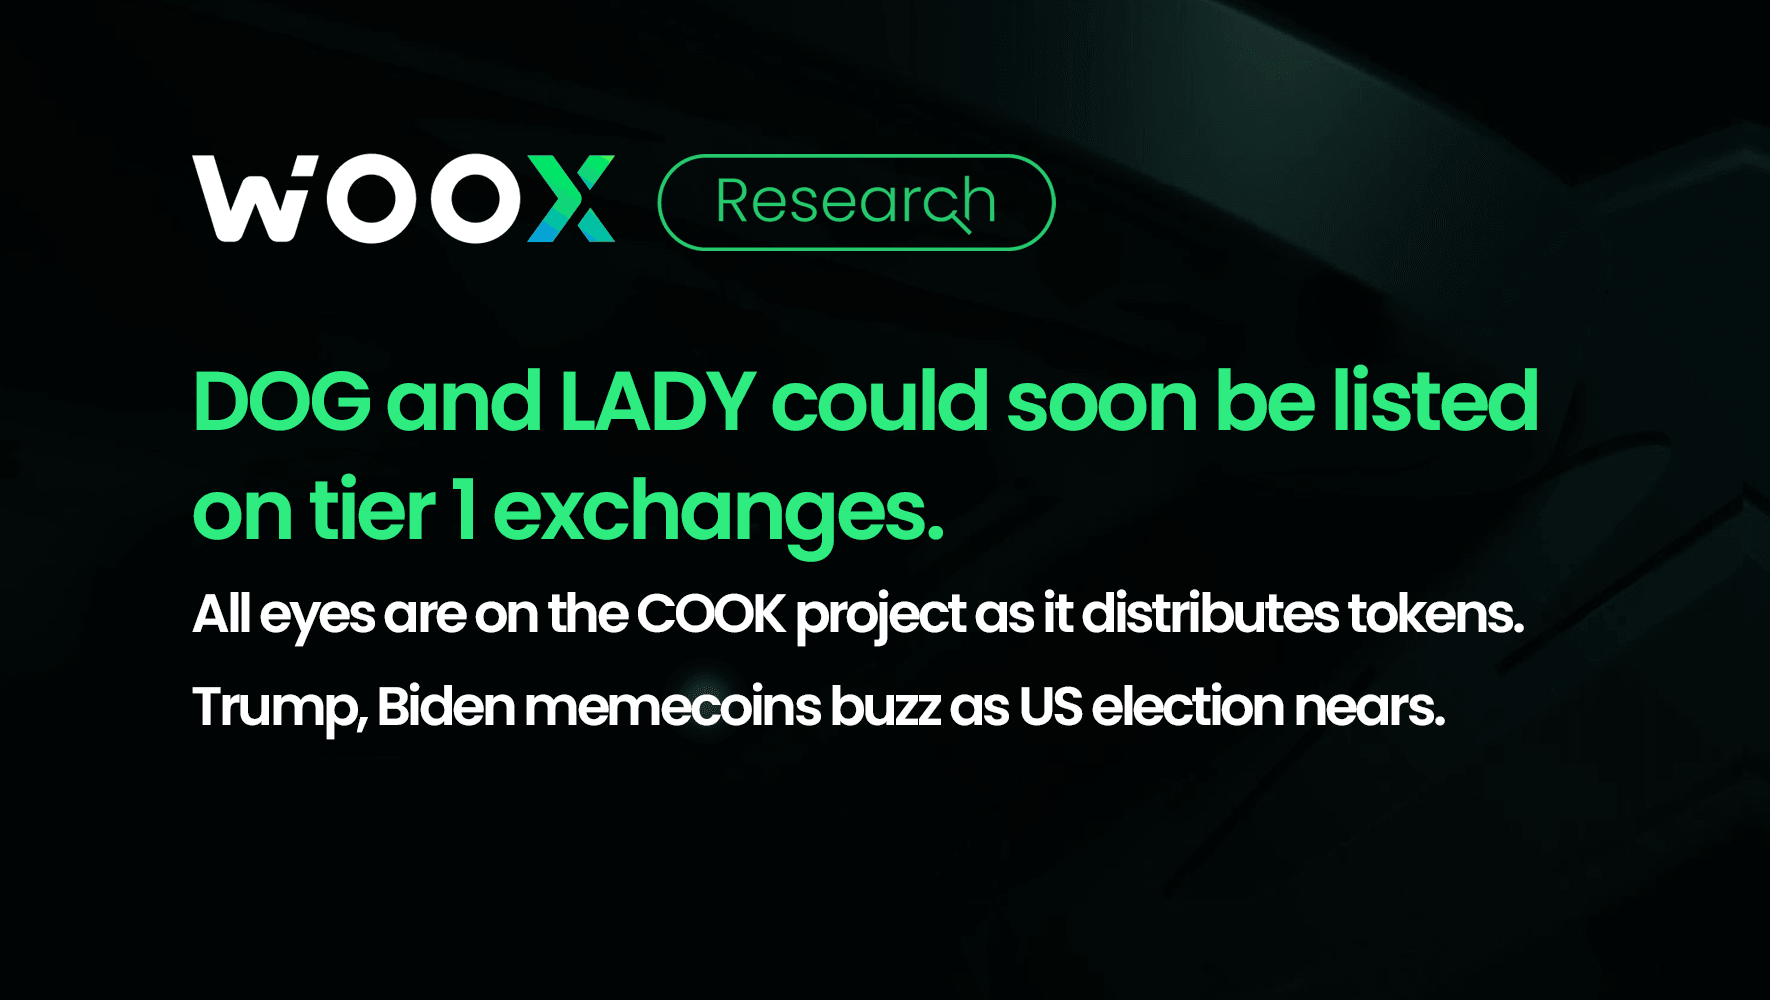 DOG and LADY could soon be listed on tier 1 exchanges